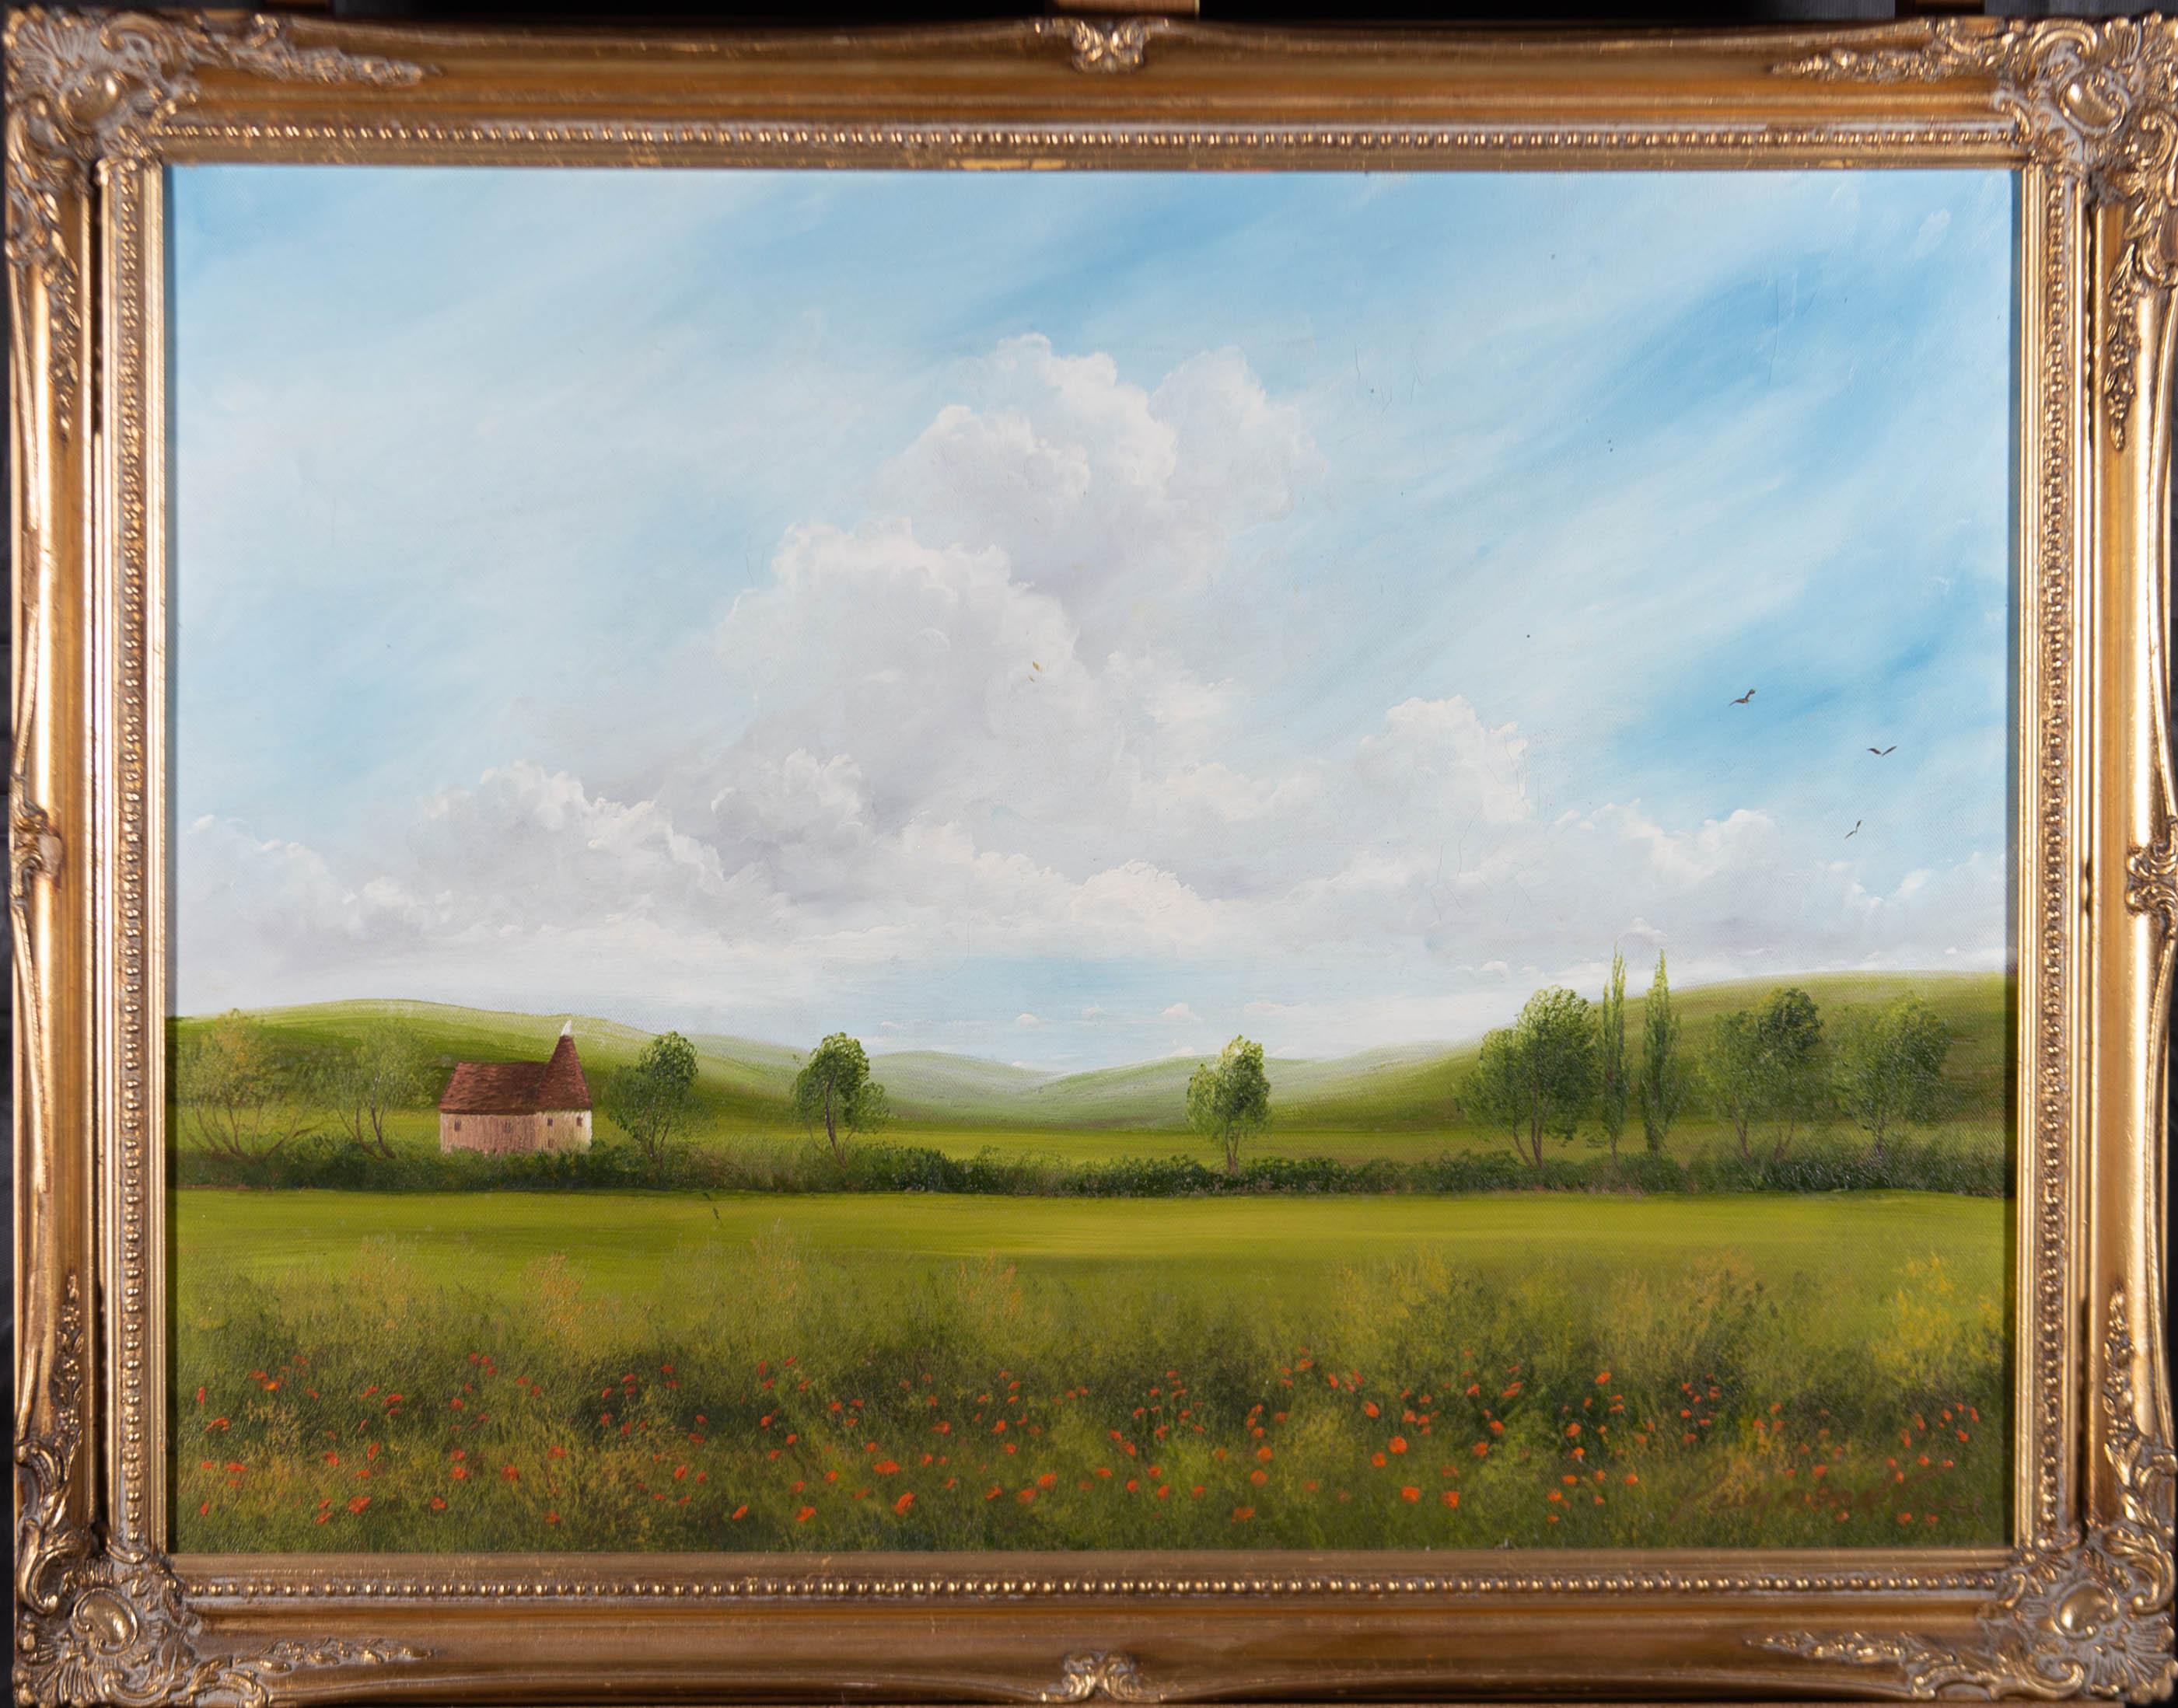 Unknown Landscape Painting - Raymond Price - 20th Century Oil, Green Fields